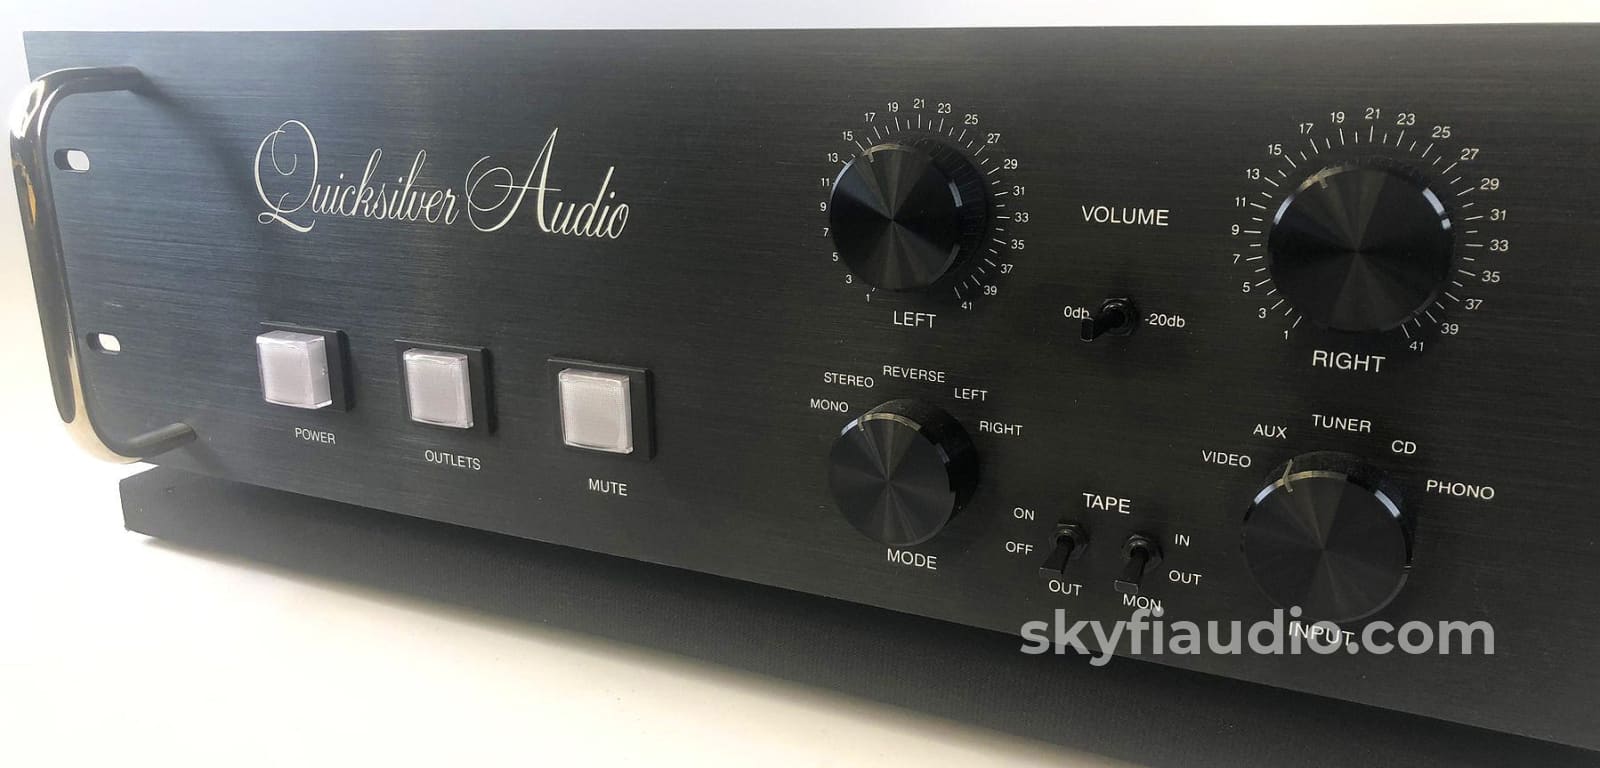 Quicksilver Audio Tube Preamp With Built In Phono Stage - Rare And Mint Preamplifier